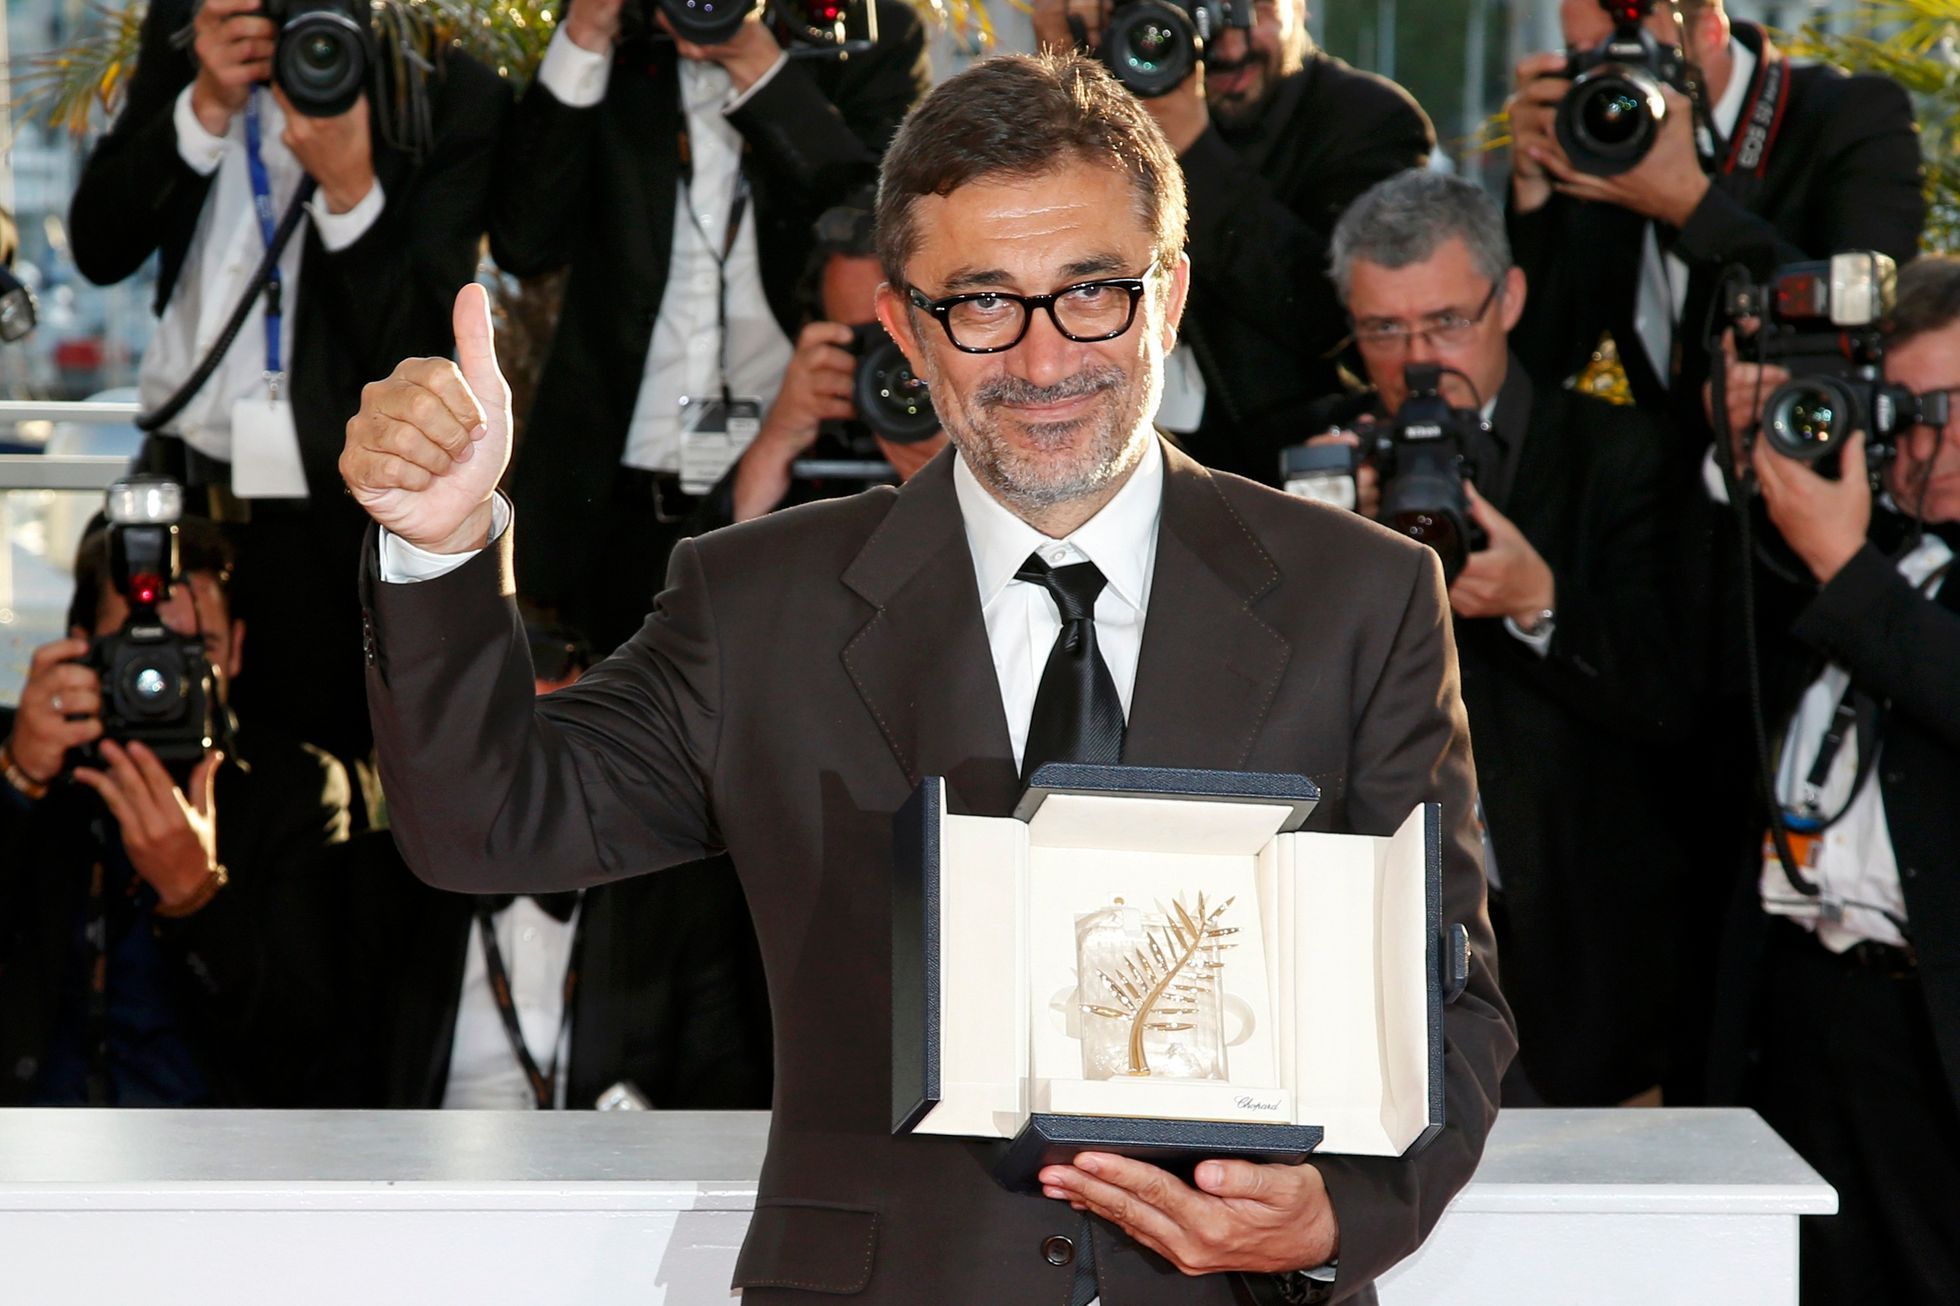 Director Nuri Bilge Ceylan, Palme d'Or award winner for his film &quot;Winter Sleep&quot;, poses during a photocall at the closing ceremony of the 67th Cannes Film Festival in Cannes